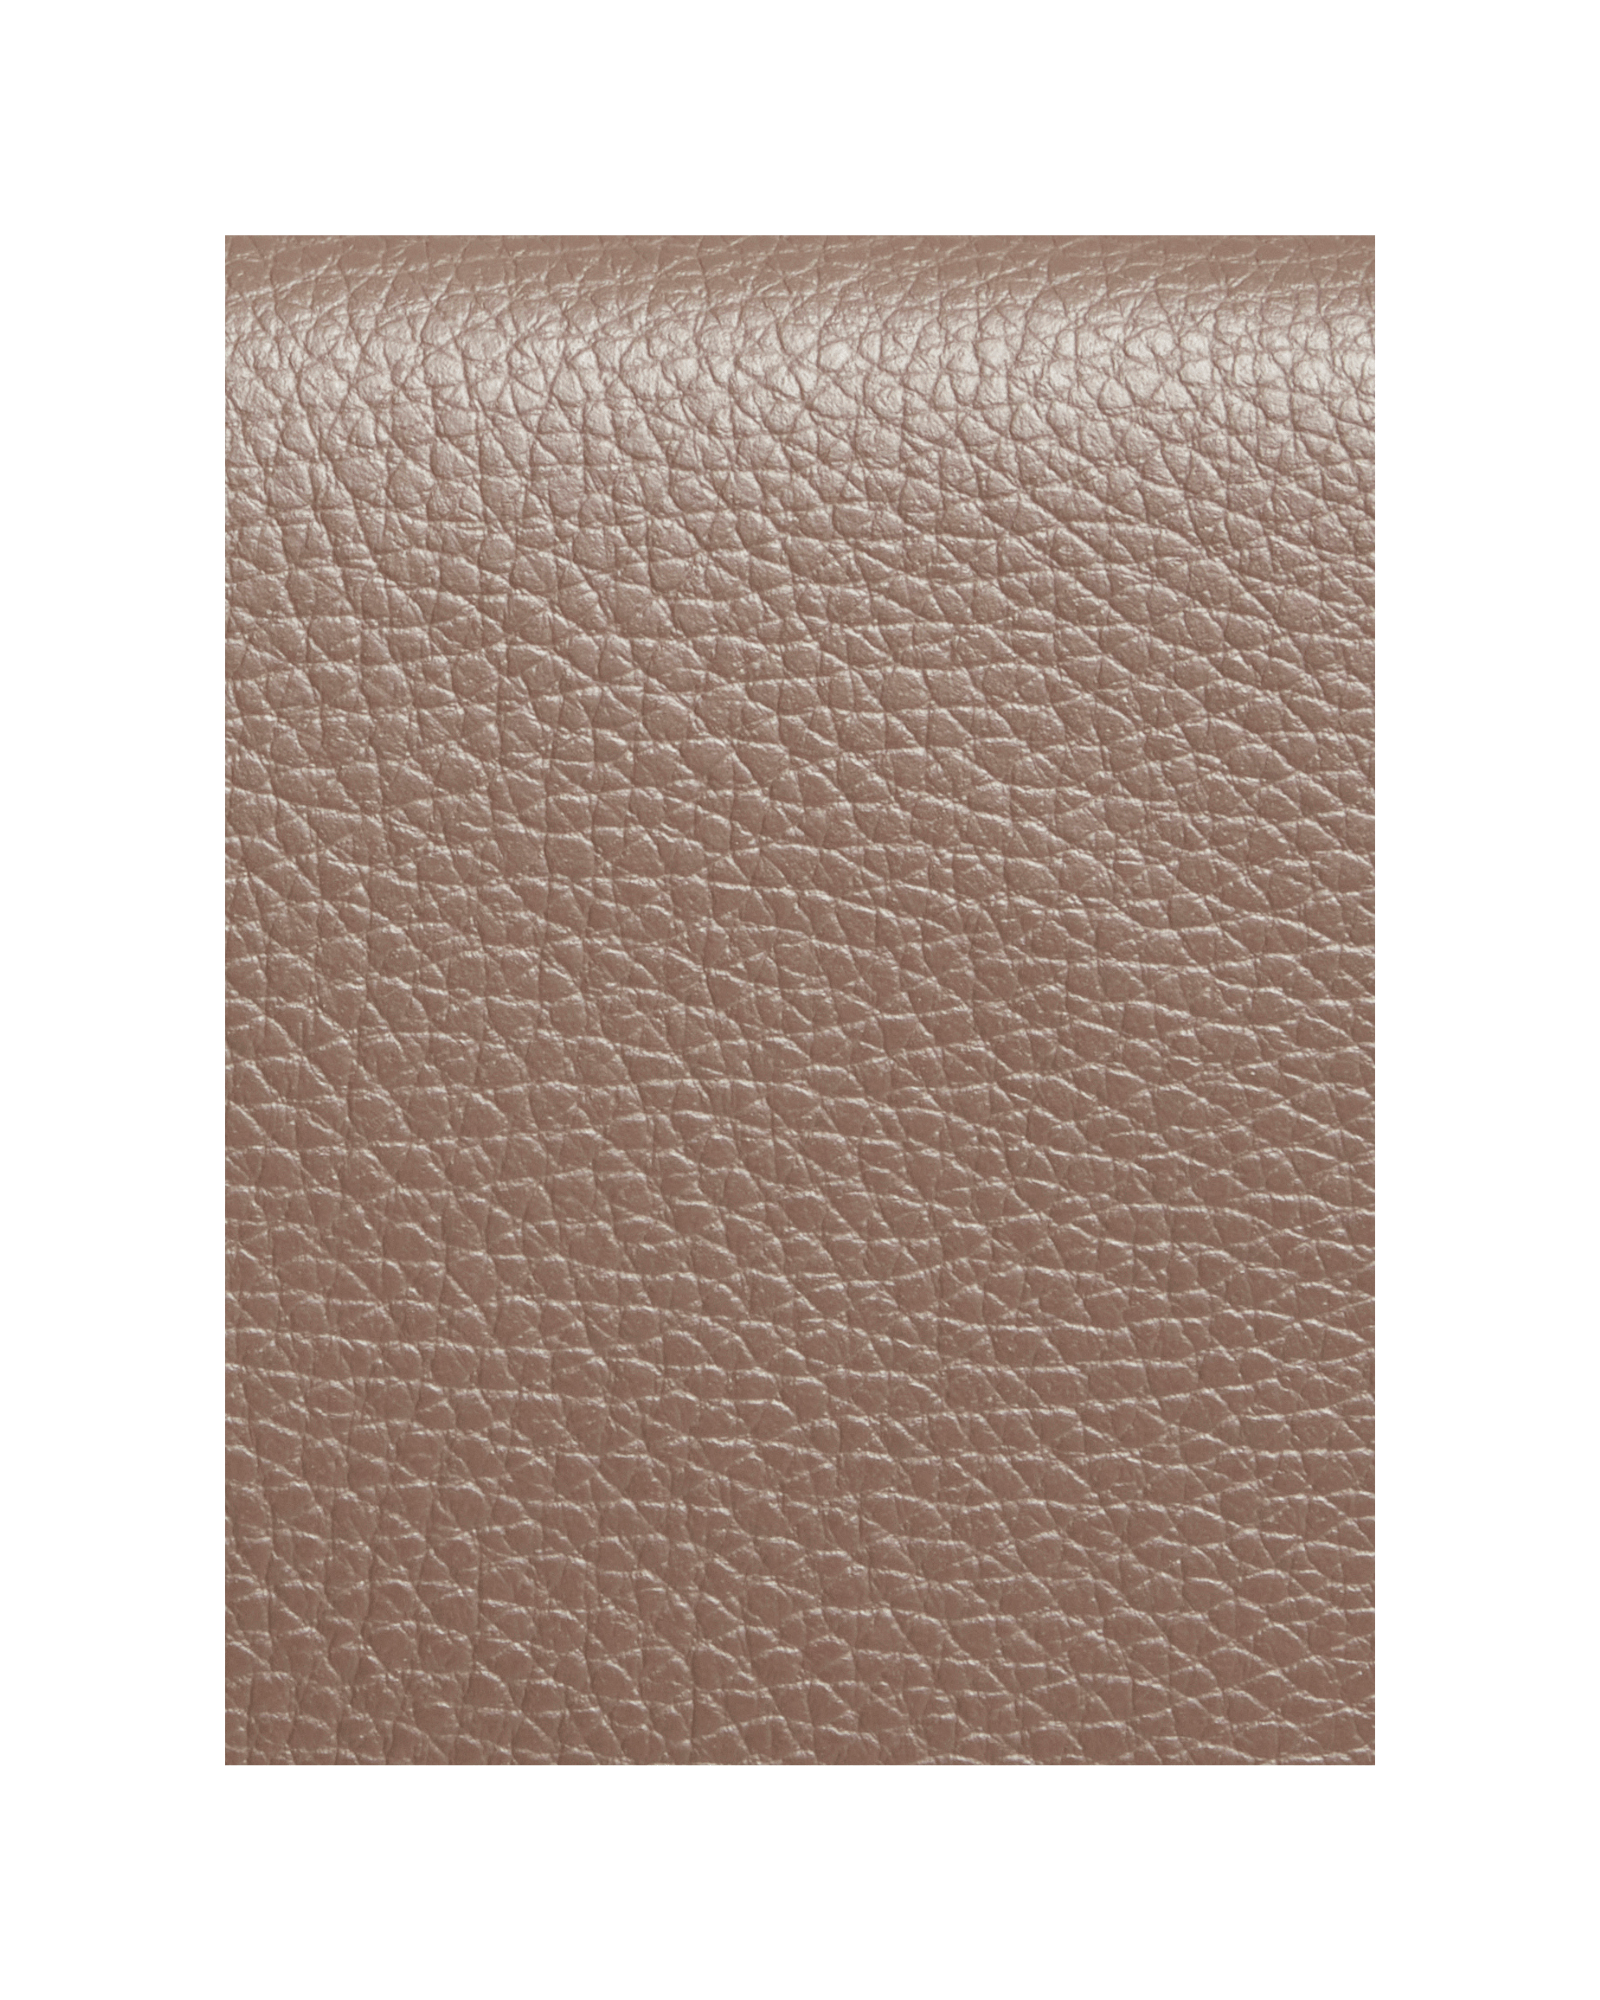 Textured Taupe Leather image